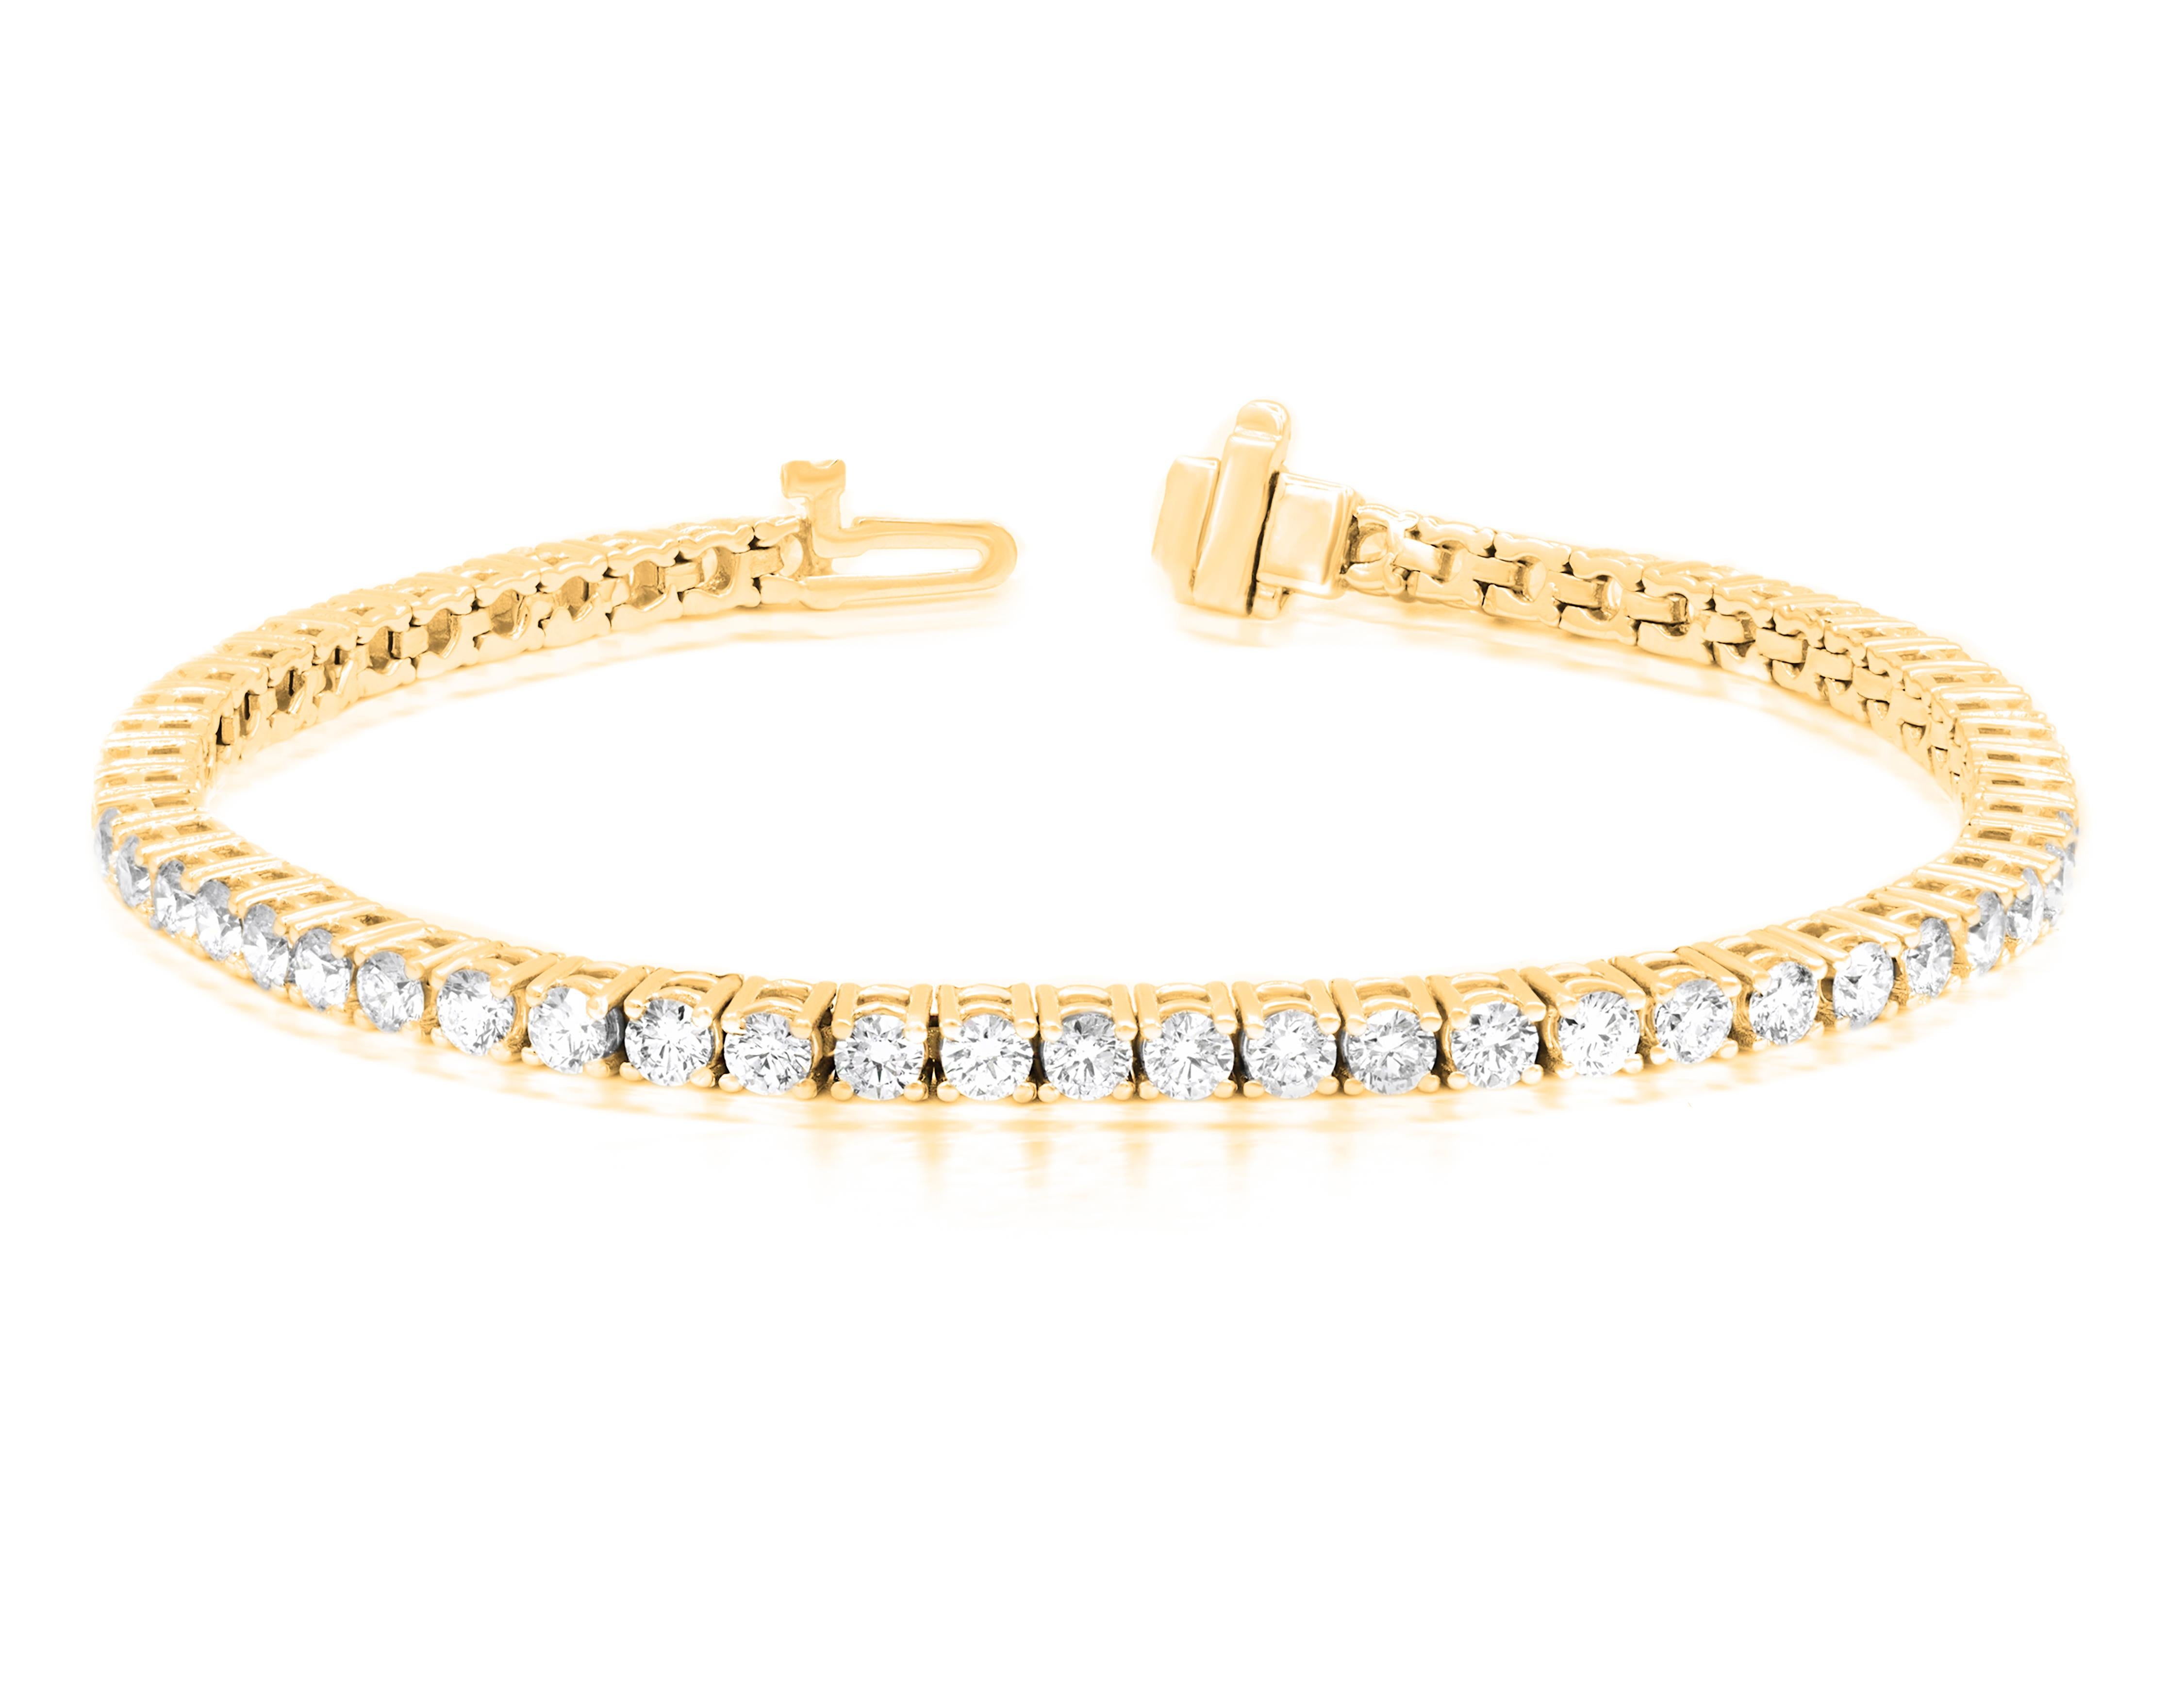 14kt yellow gold tennis bracelet featuring 4.00 cts tw of round diamonds in a 4 prong setting GH SI.
Diana M. is a leading supplier of top-quality fine jewelry for over 35 years.
Diana M is one-stop shop for all your jewelry shopping, carrying line